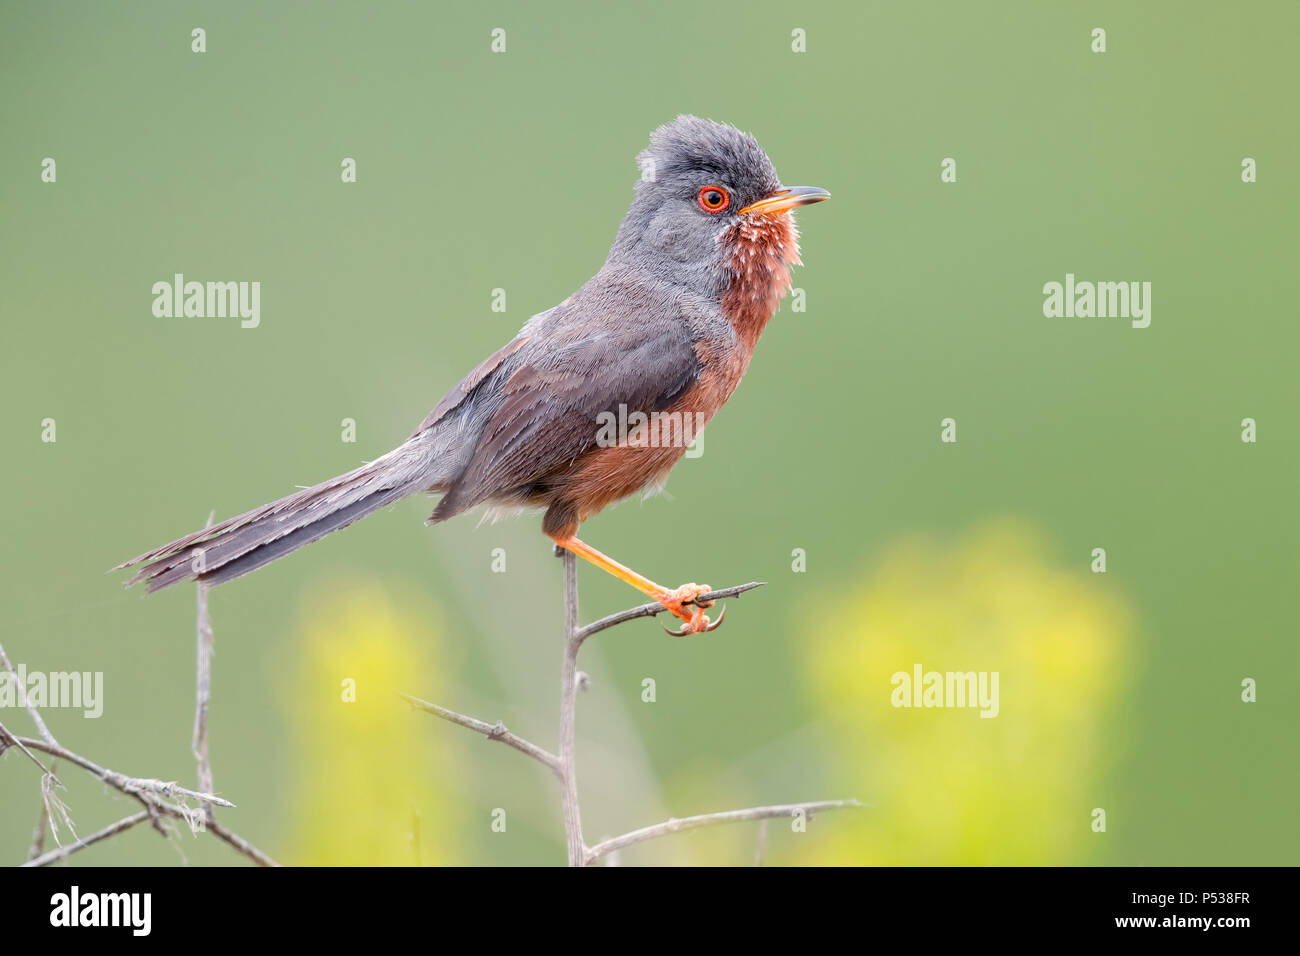 Dartford Warbler (Sylvia undata), adult male perched on a branch Stock Photo